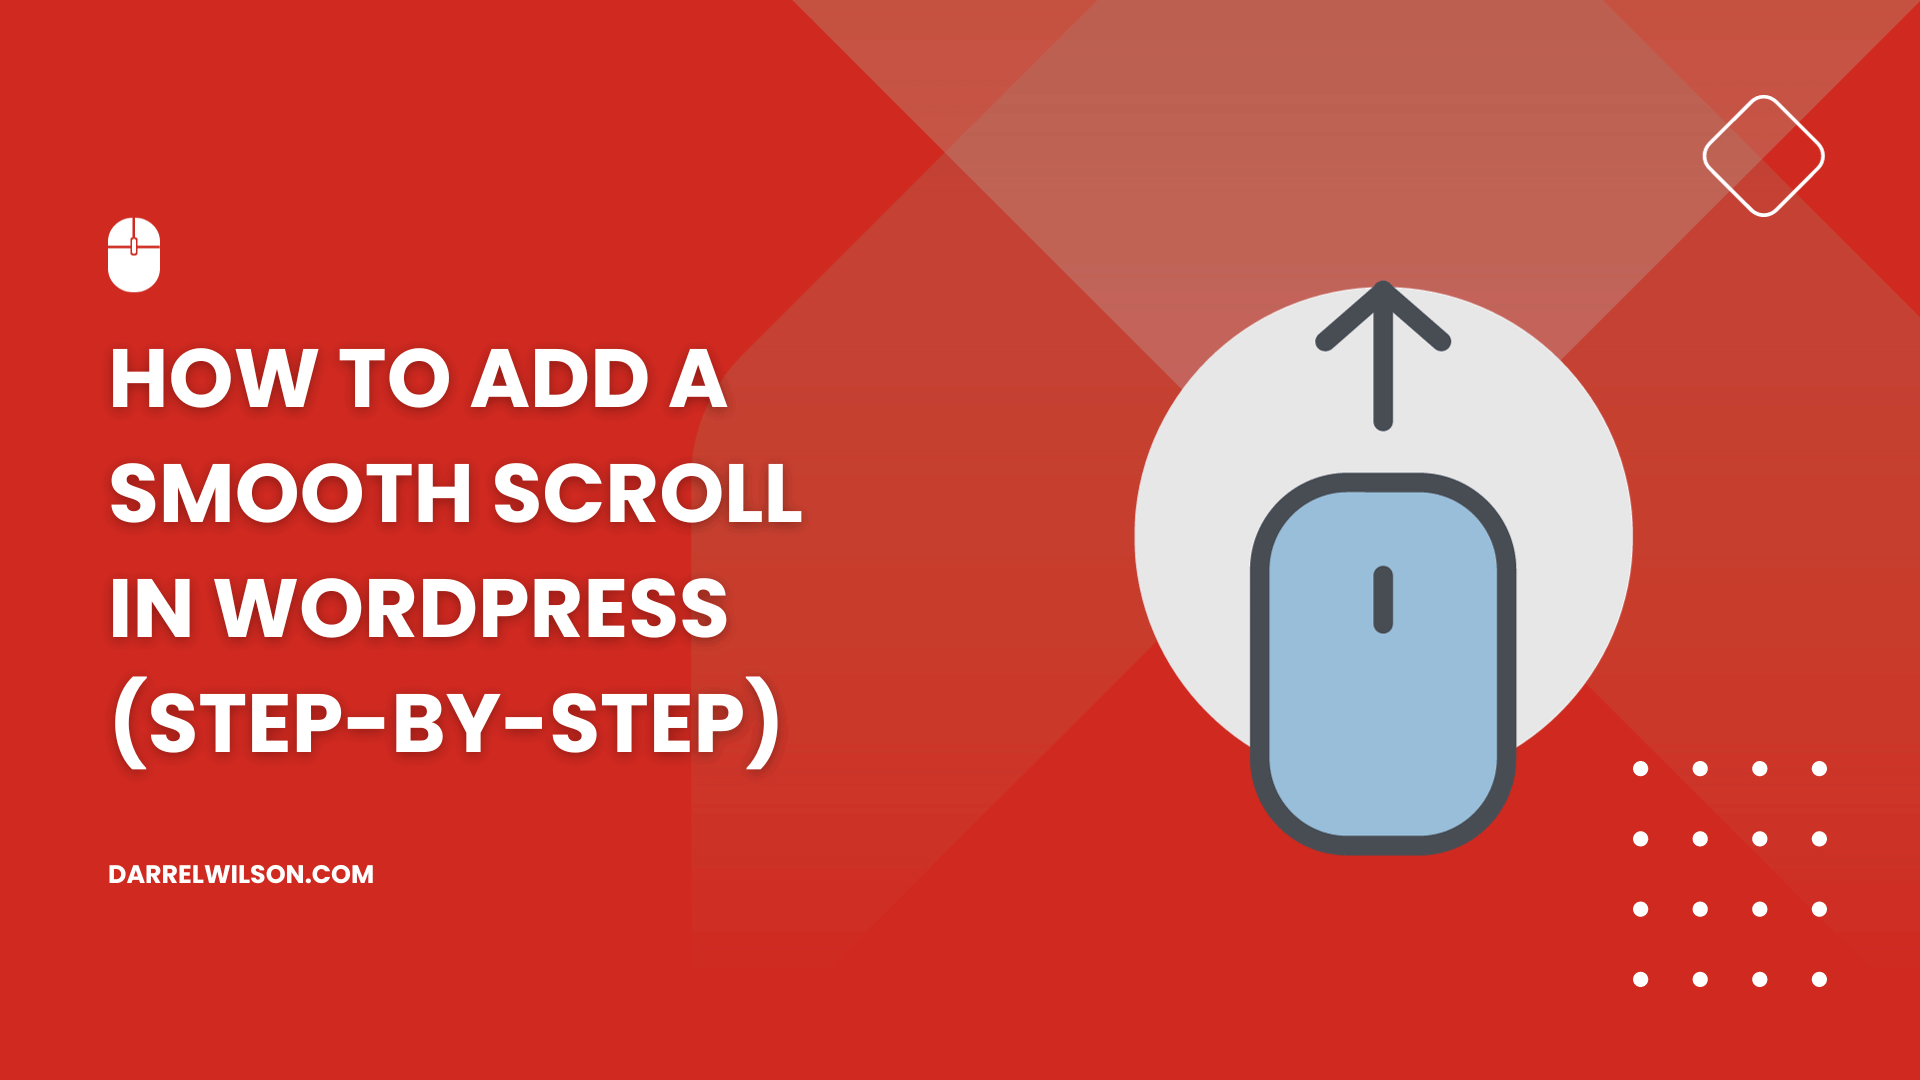 How to Add a Smooth Scroll in WordPress (Step-By-Step)